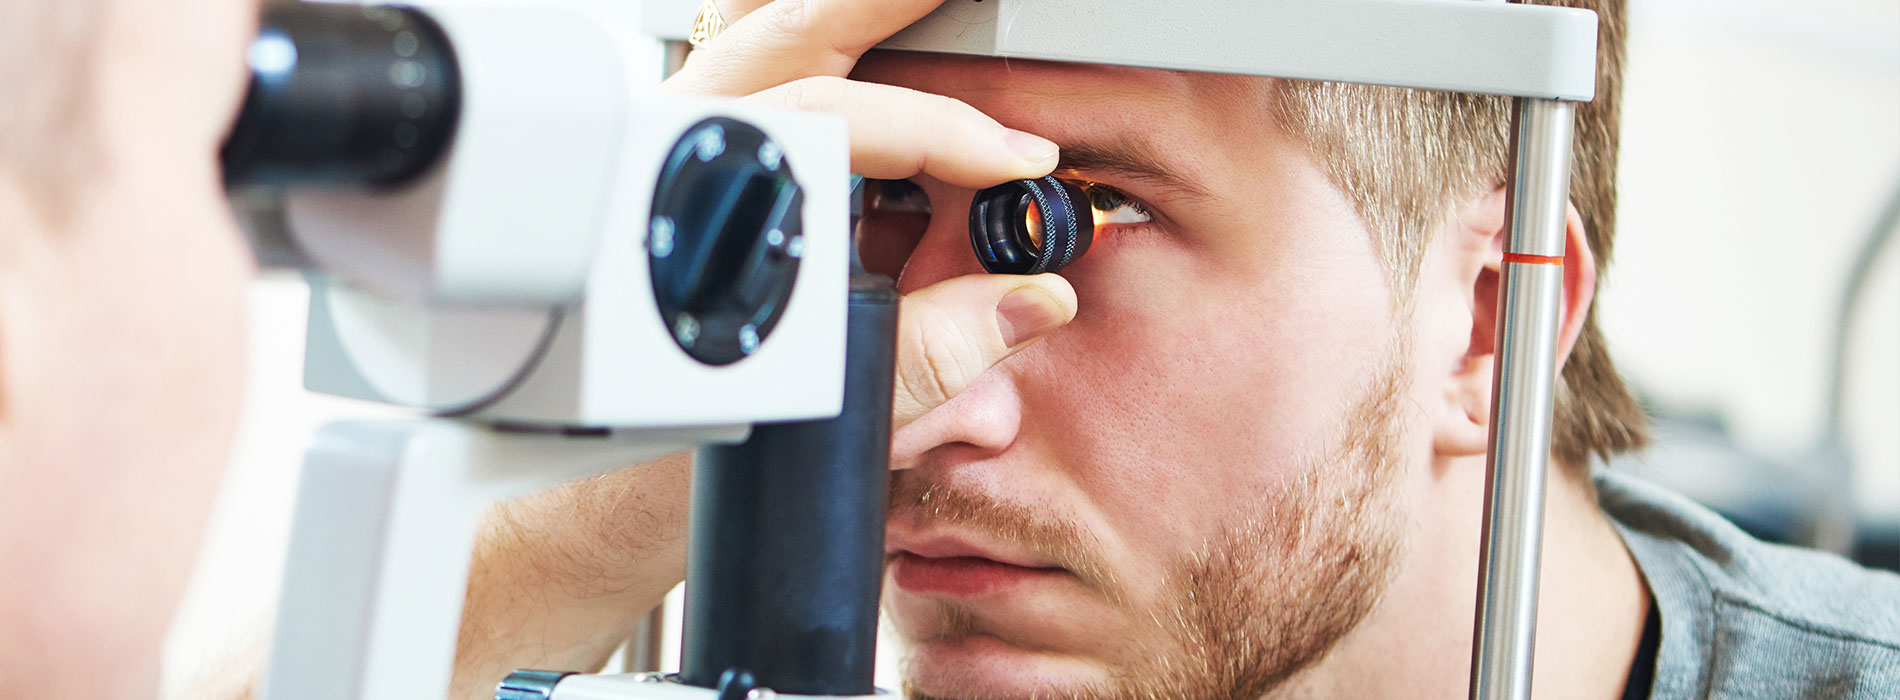 Clear Eye Care | Diabetic Eye Exams, Glaucoma Diagnosis   Management and Vision Therapy